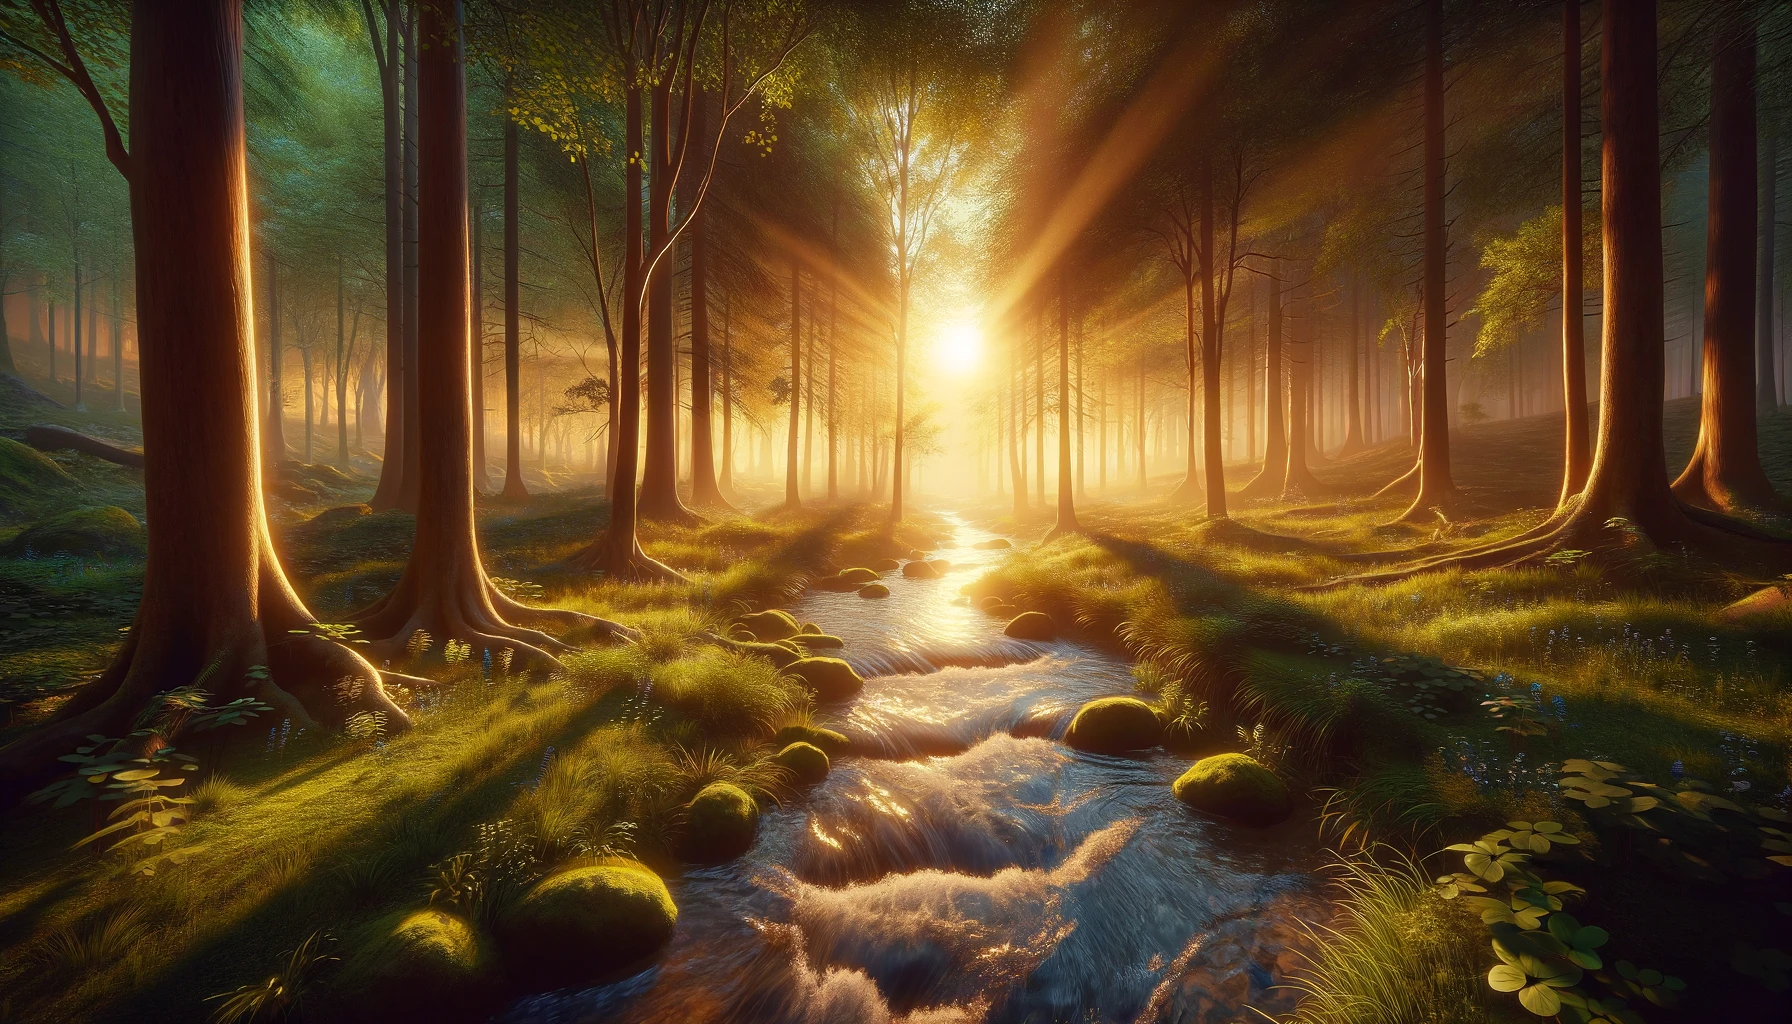 Visualize a serene and calming scene to counteract feelings of anxiety. Imagine a tranquil forest at sunrise, the first rays of sun filtering through